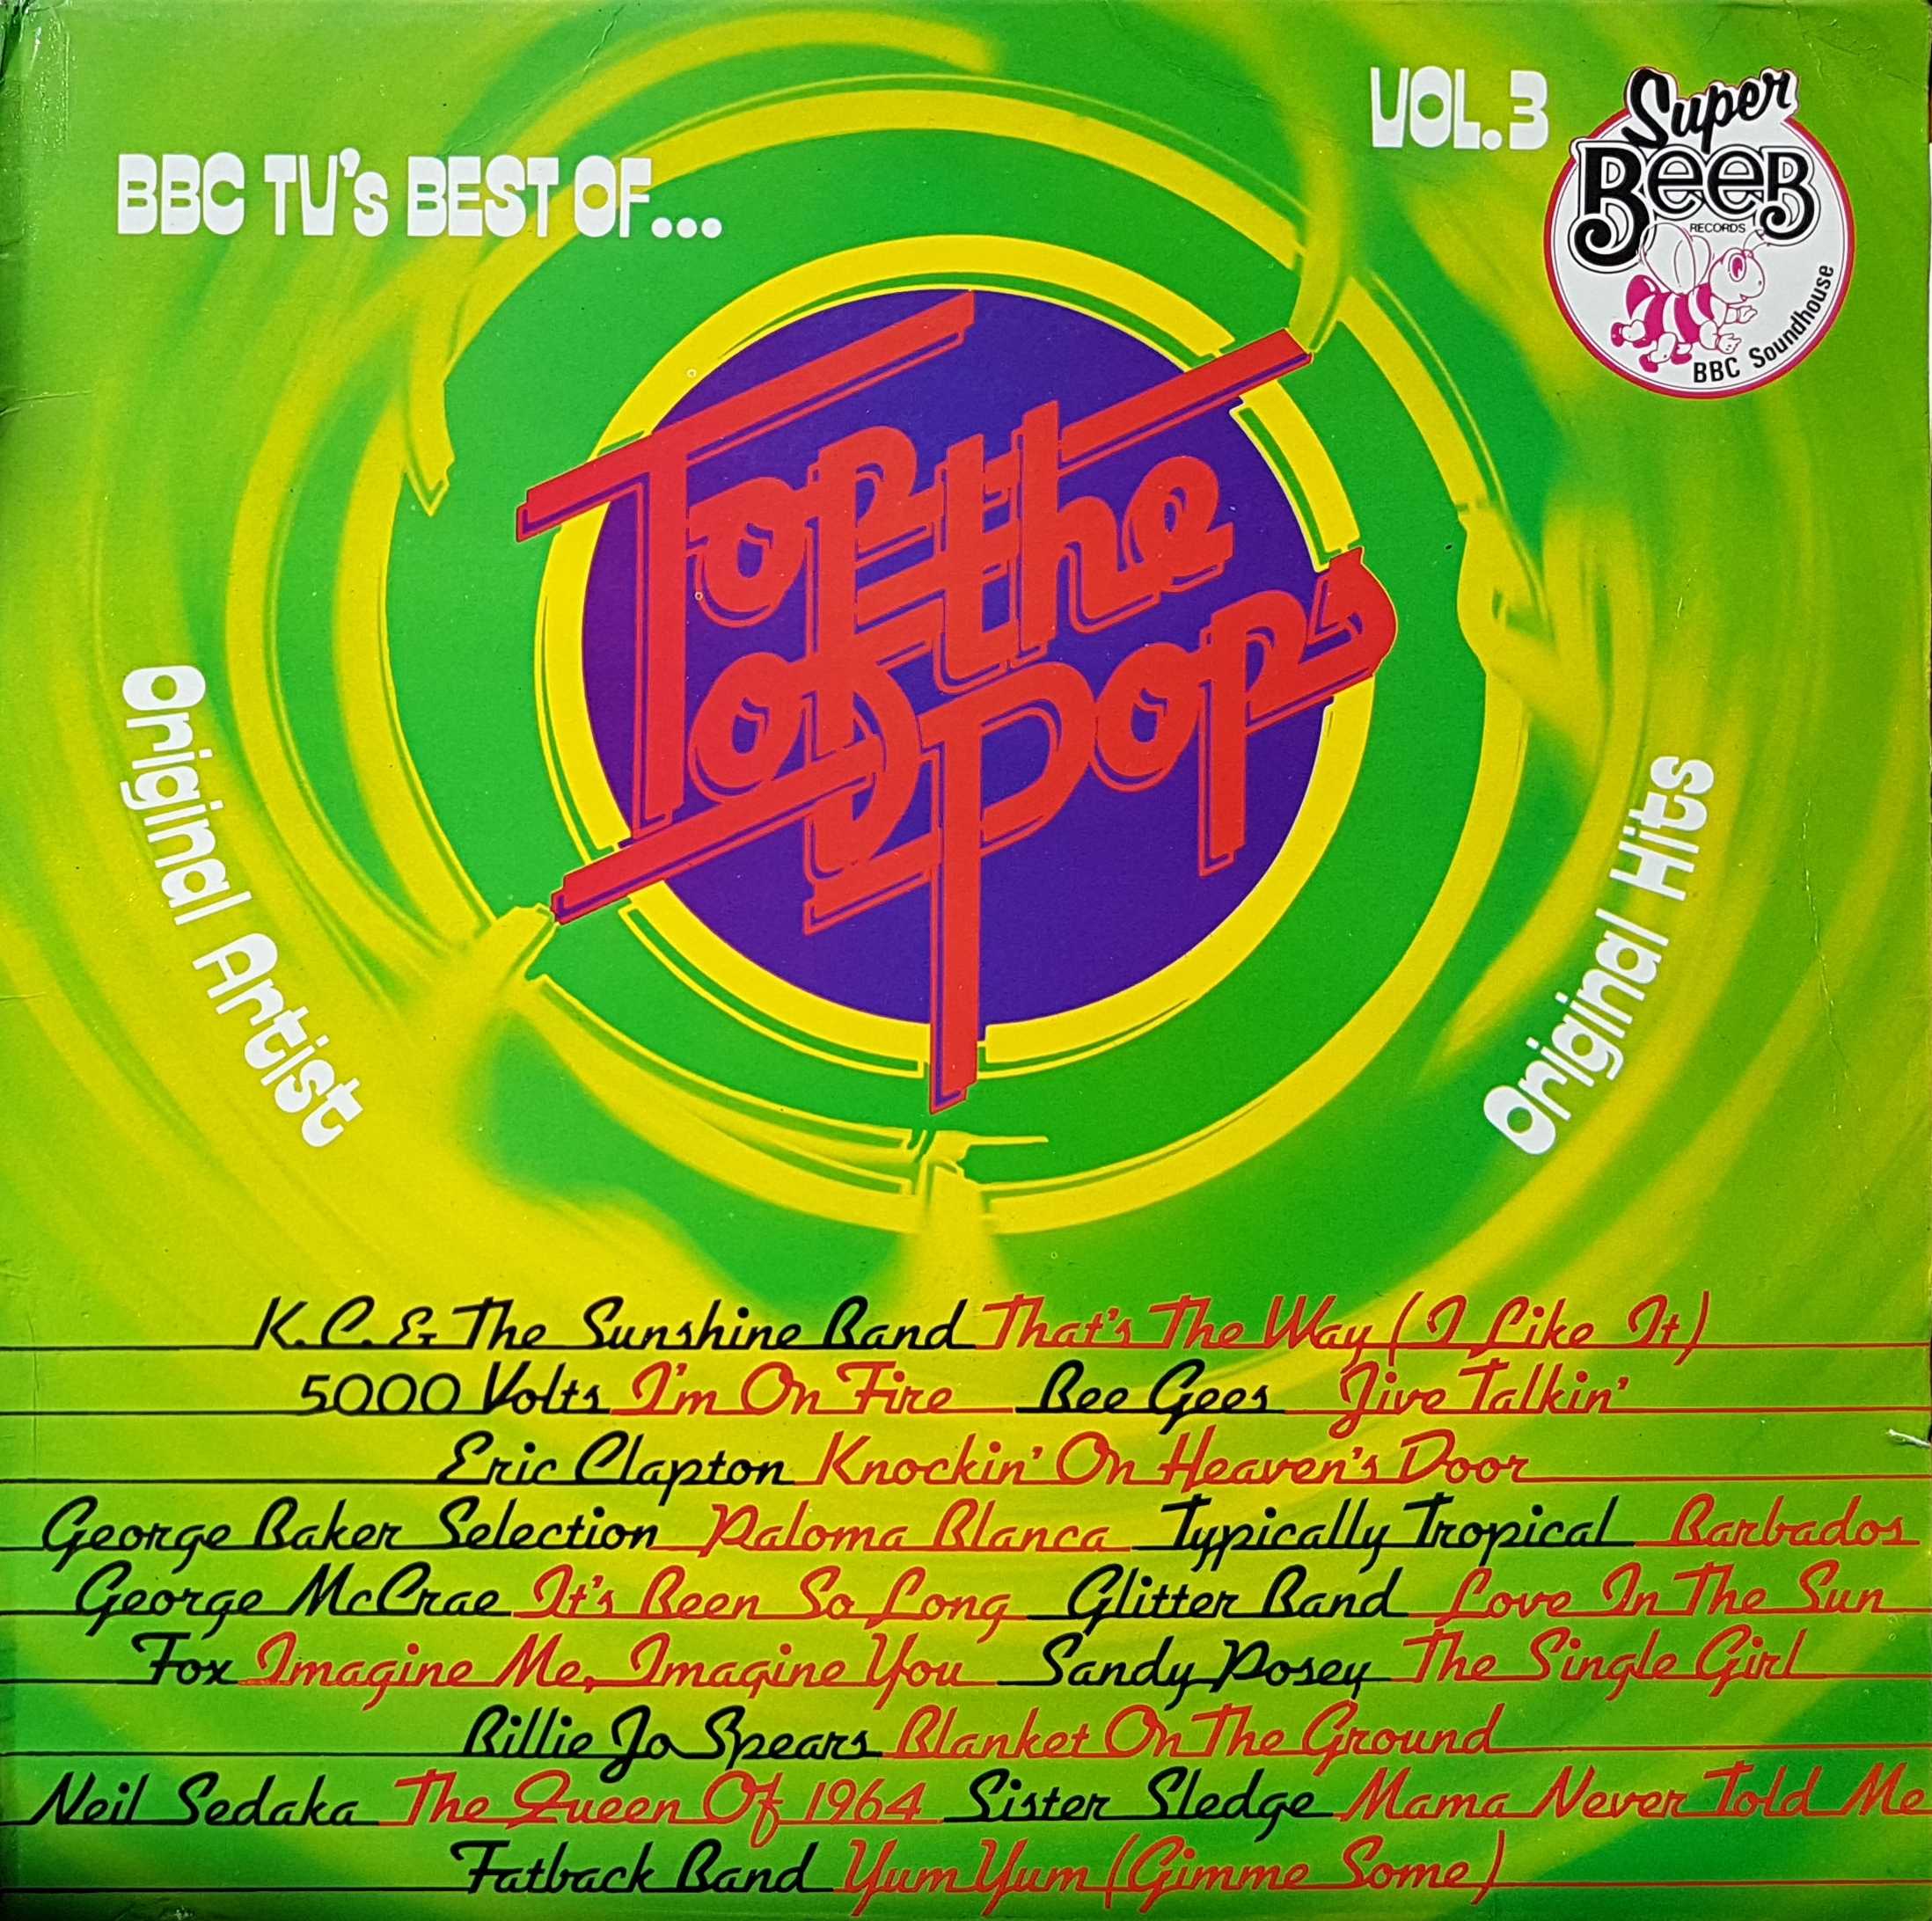 Picture of BBC TV's best of top of the pops - Volume 3 by artist Various from the BBC albums - Records and Tapes library